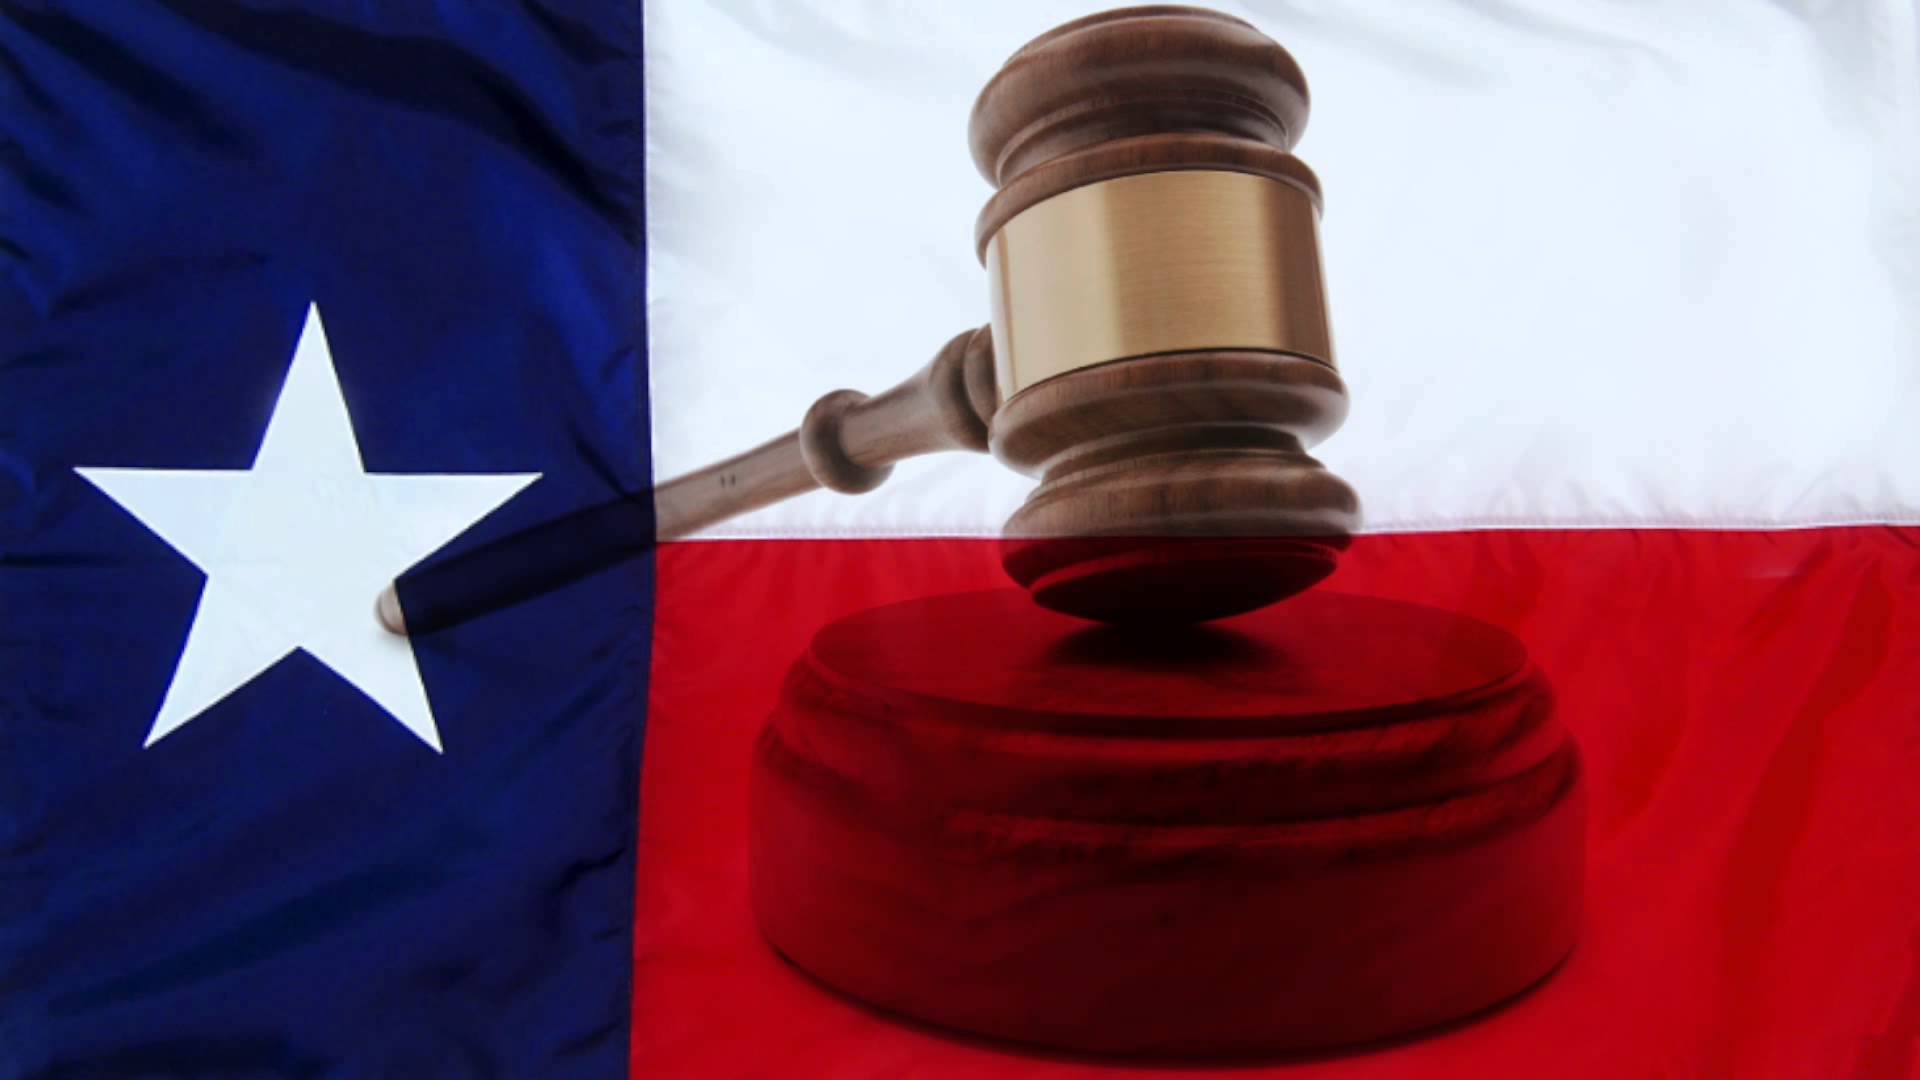 The Texas Legislature 87th Session: New Texas Family Code Bills and Revisions